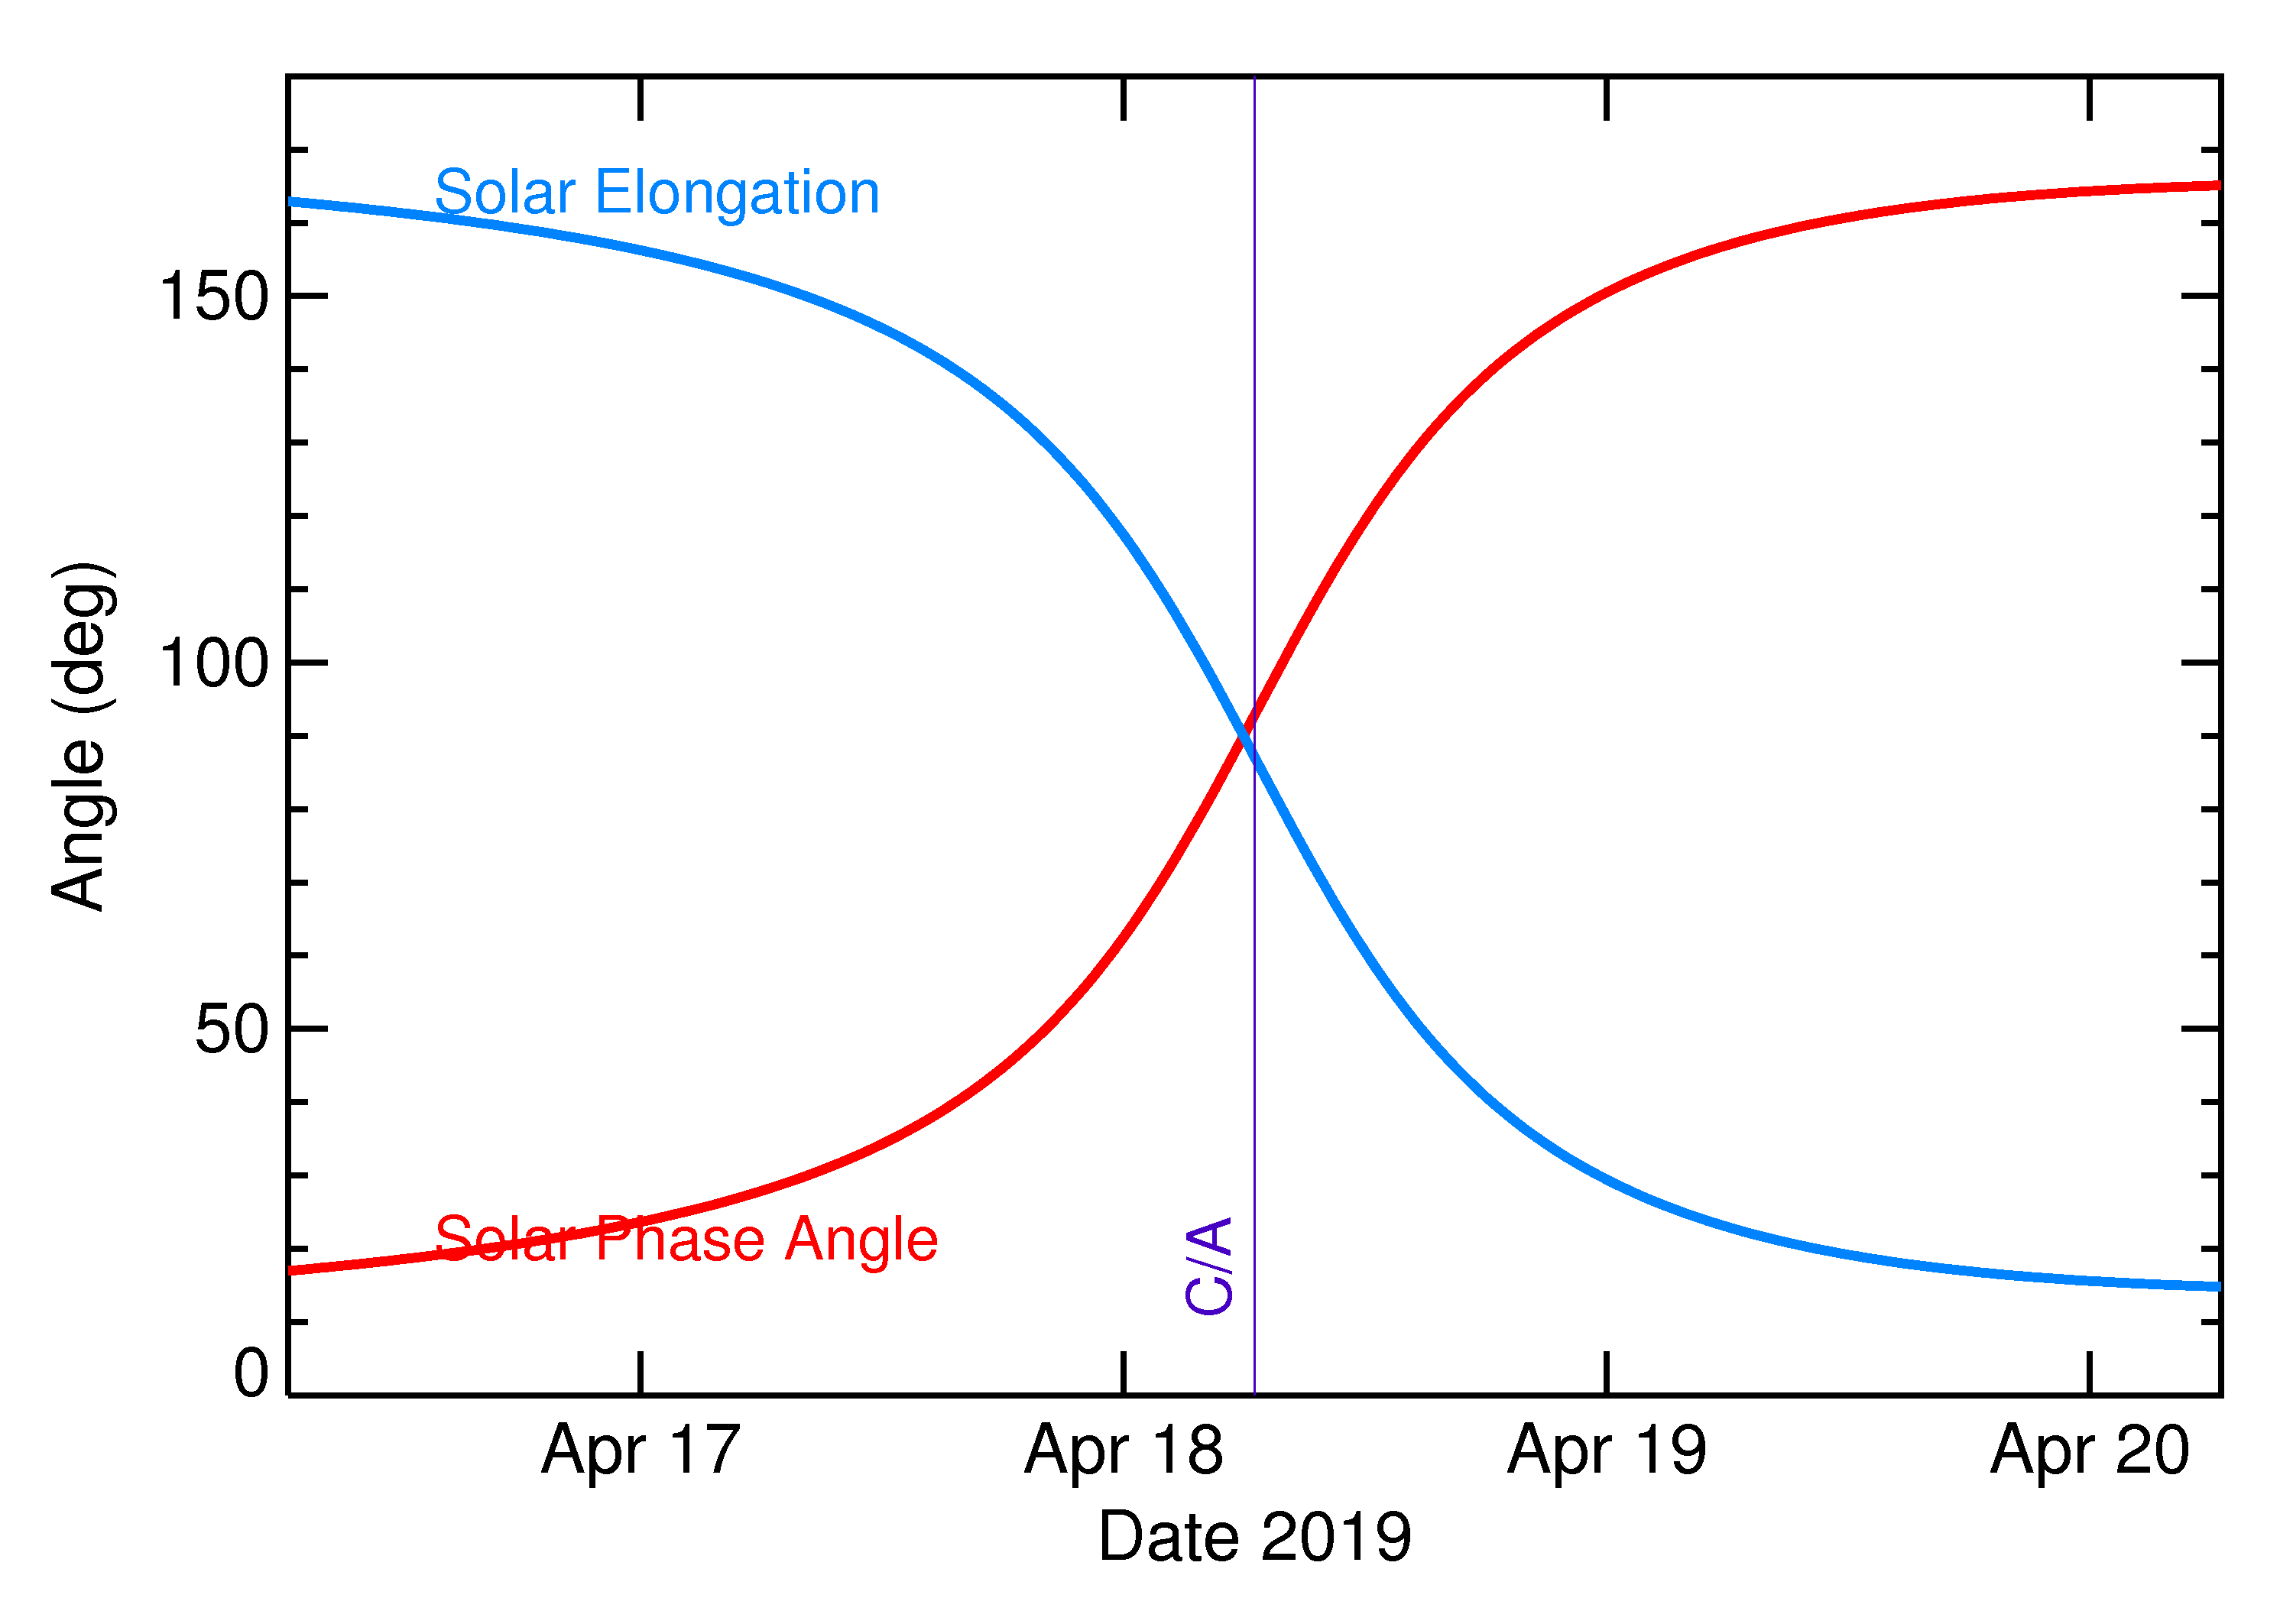 Solar Elongation and Solar Phase Angle of 2019 GC6 in the days around closest approach